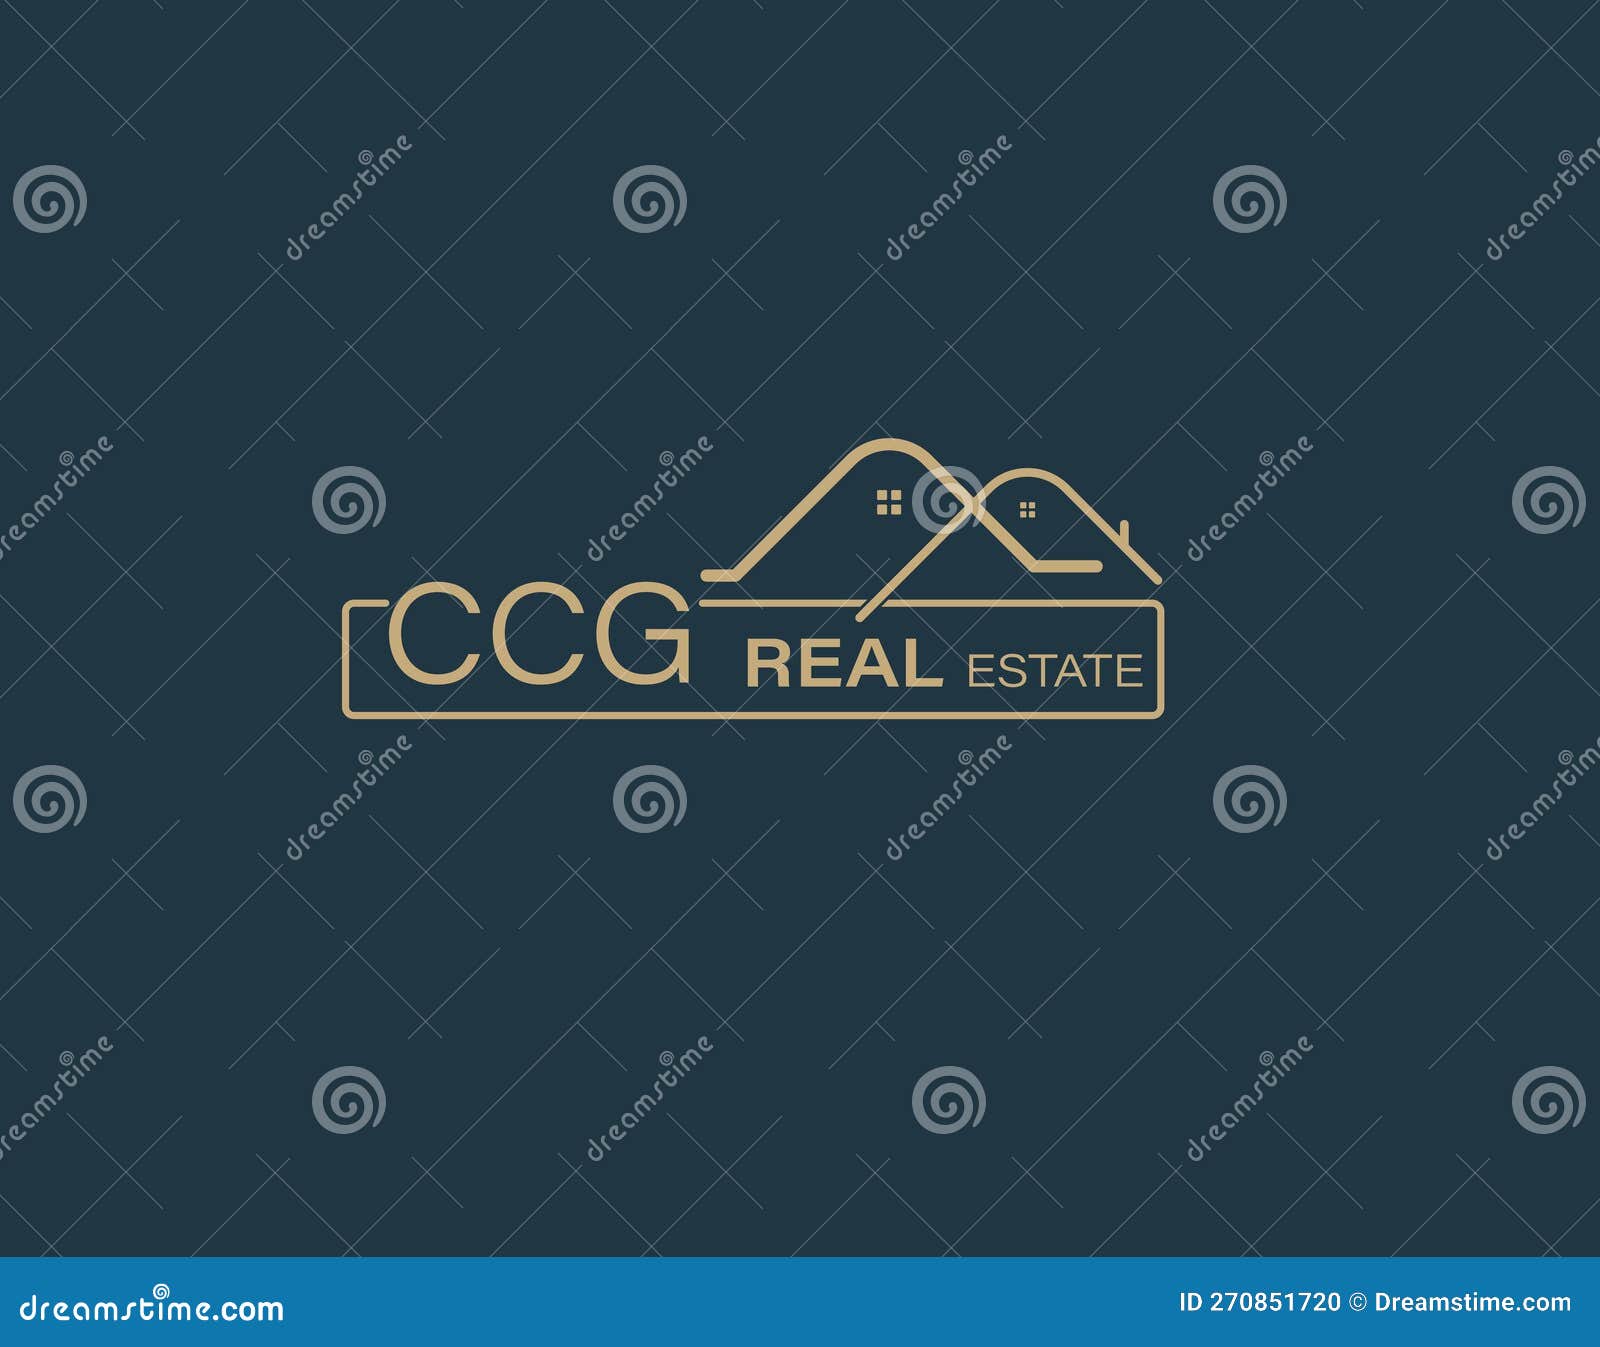 ccg real estate and consultants logo  s images. luxury real estate logo 